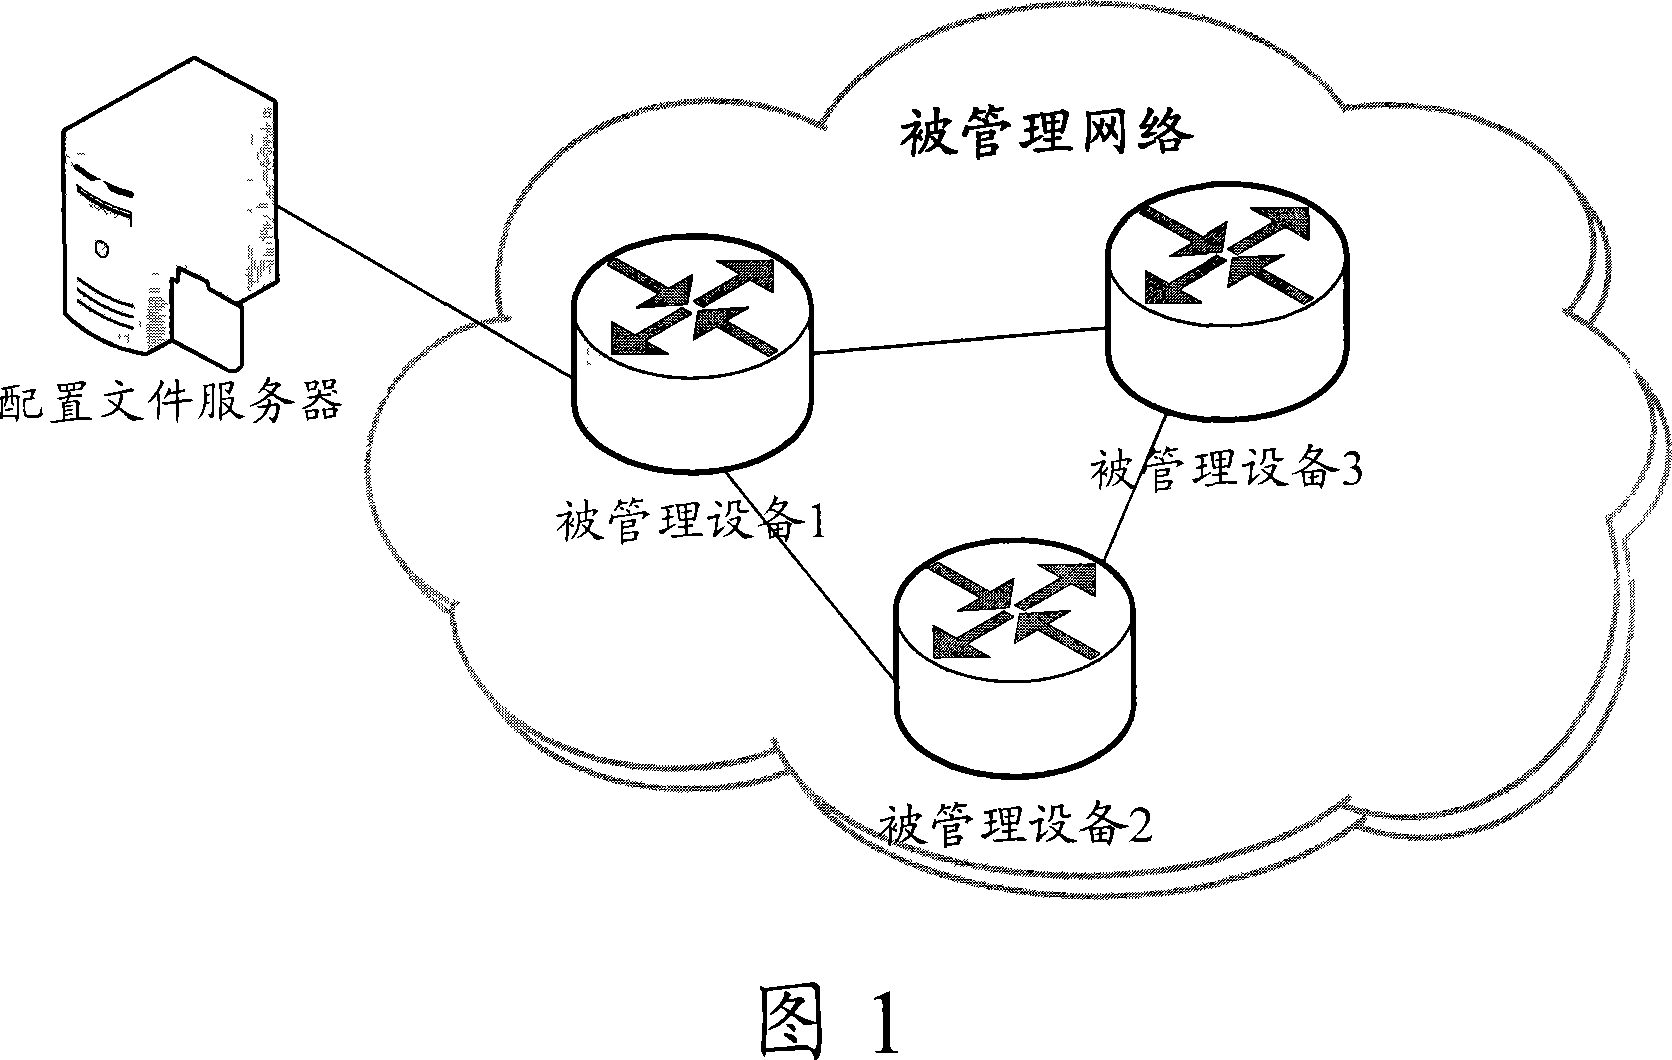 Configuration backup method, system and configuration file server and managed devices